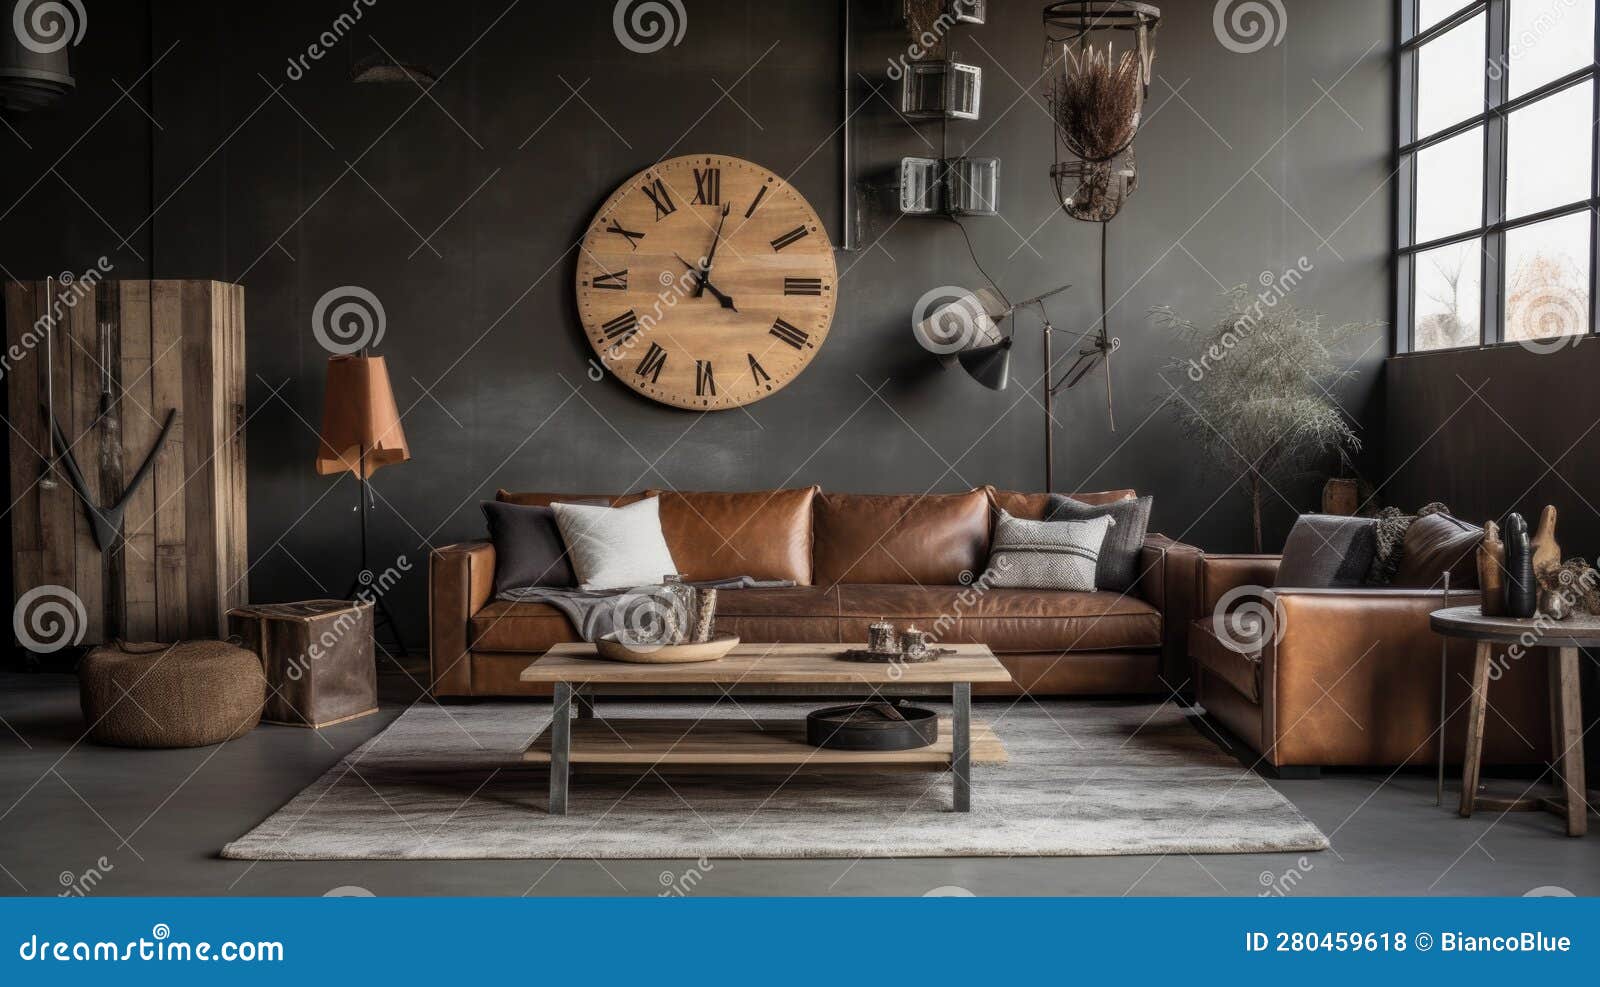 https://thumbs.dreamstime.com/z/living-room-decor-home-interior-design-rustic-industrial-style-living-room-decor-home-interior-design-rustic-industrial-style-280459618.jpg